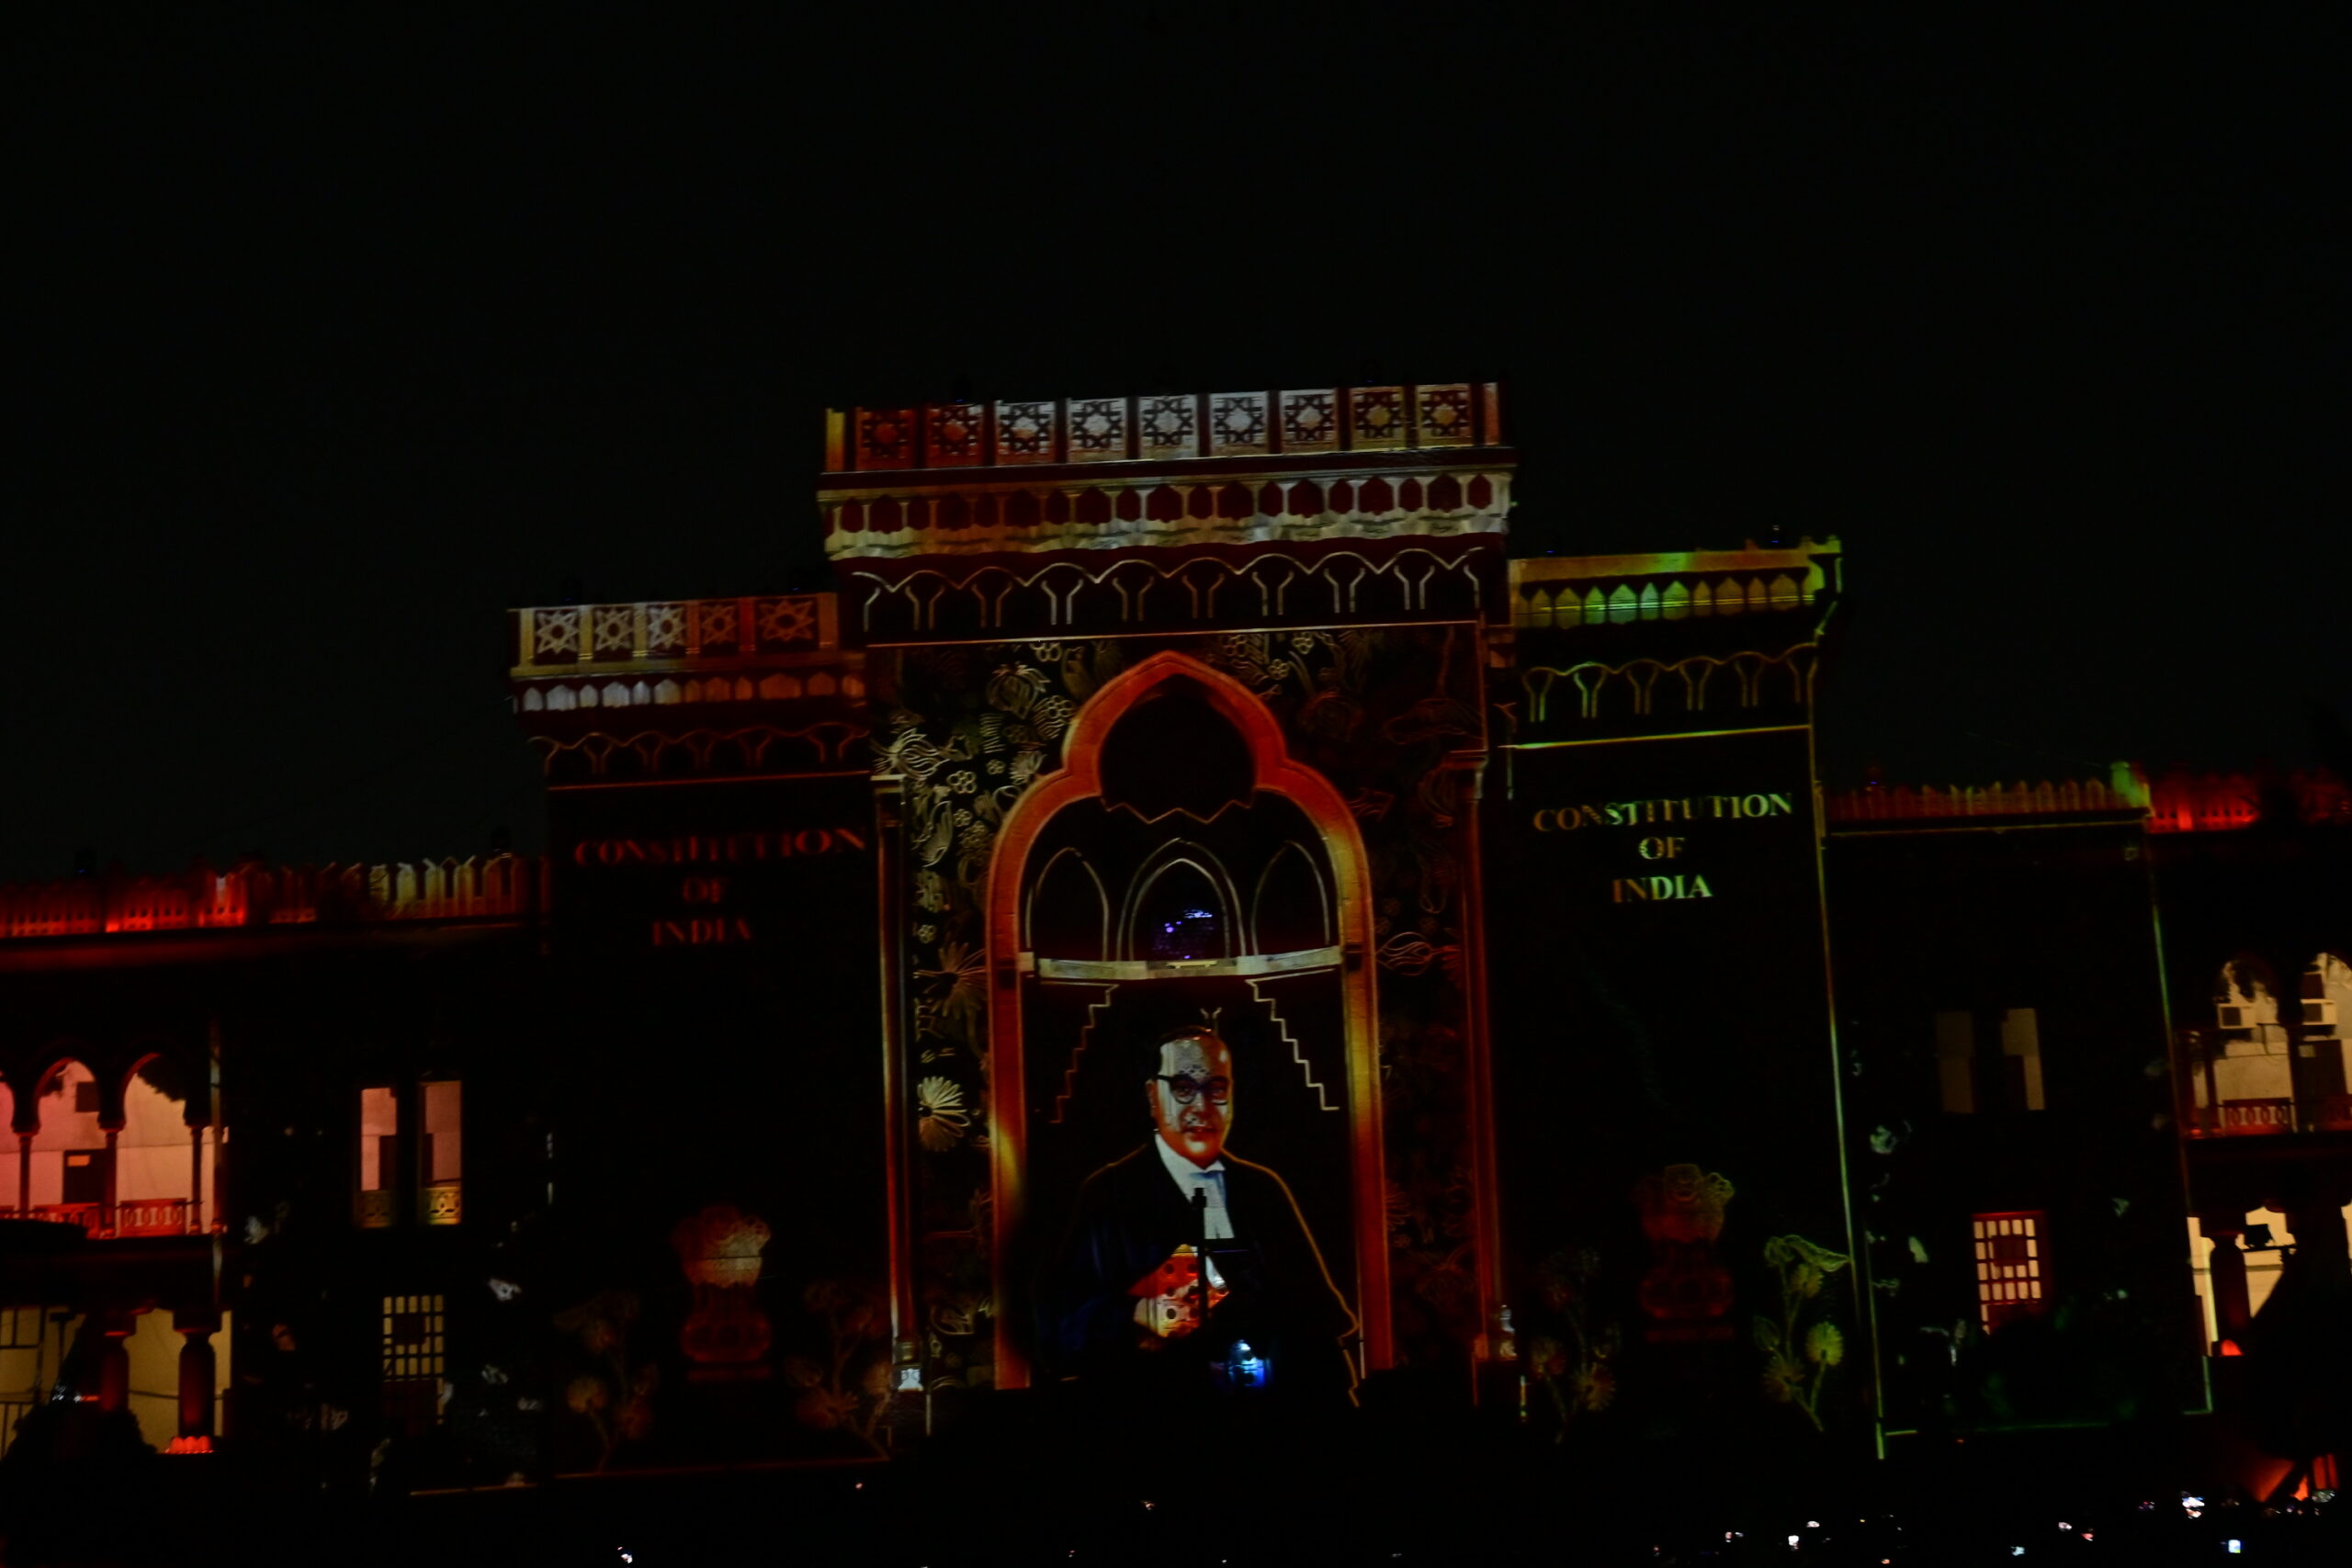 Dynamic Laser Show At Arts College In Osmania University (20)